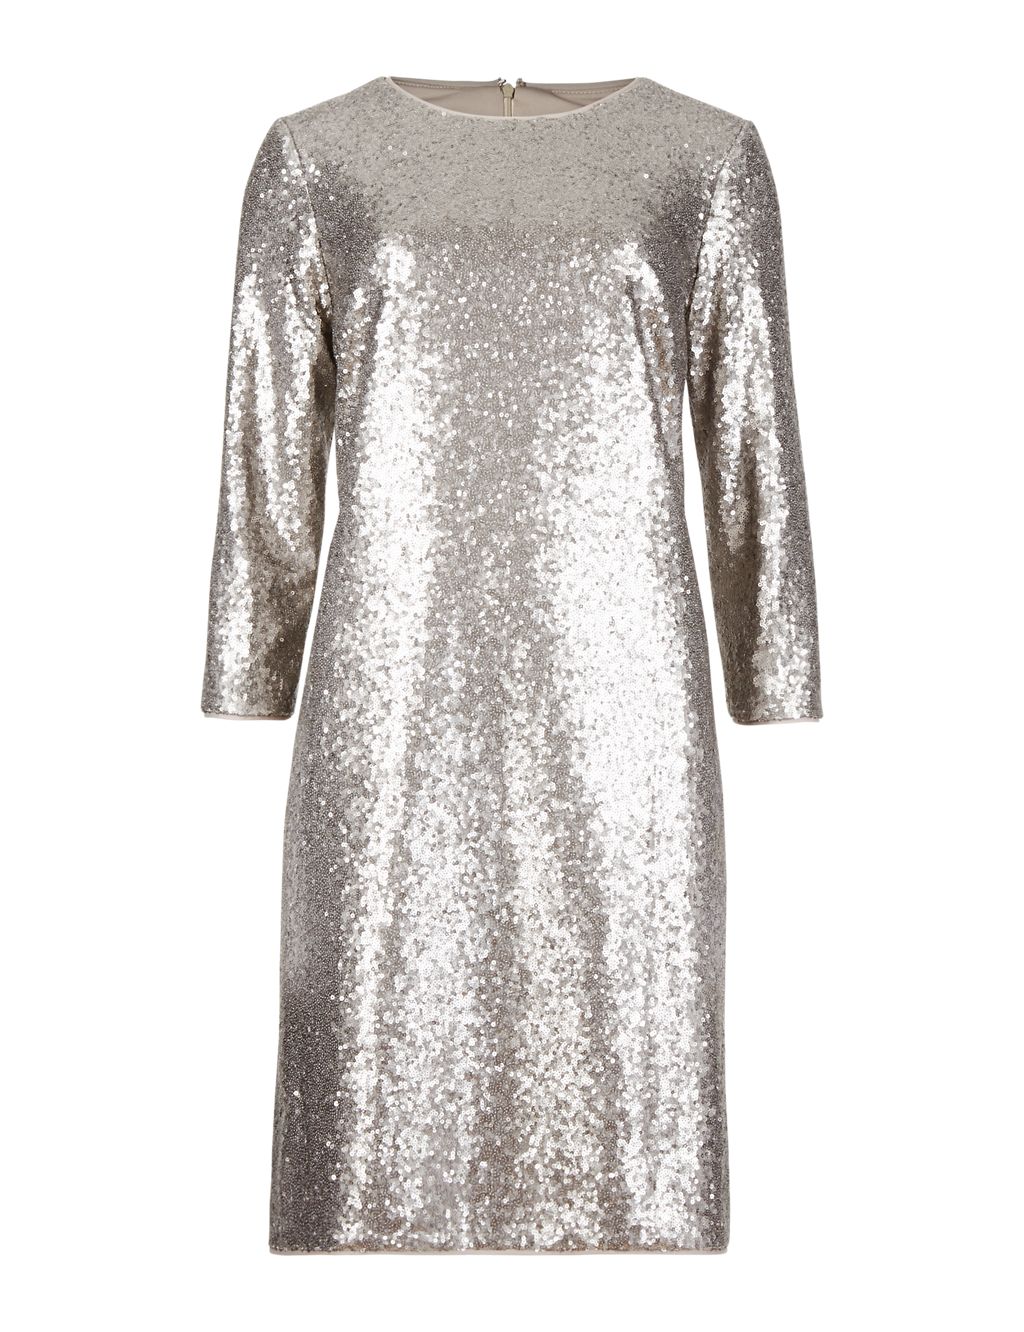 Sequin Embellished Tunic Dress 1 of 4